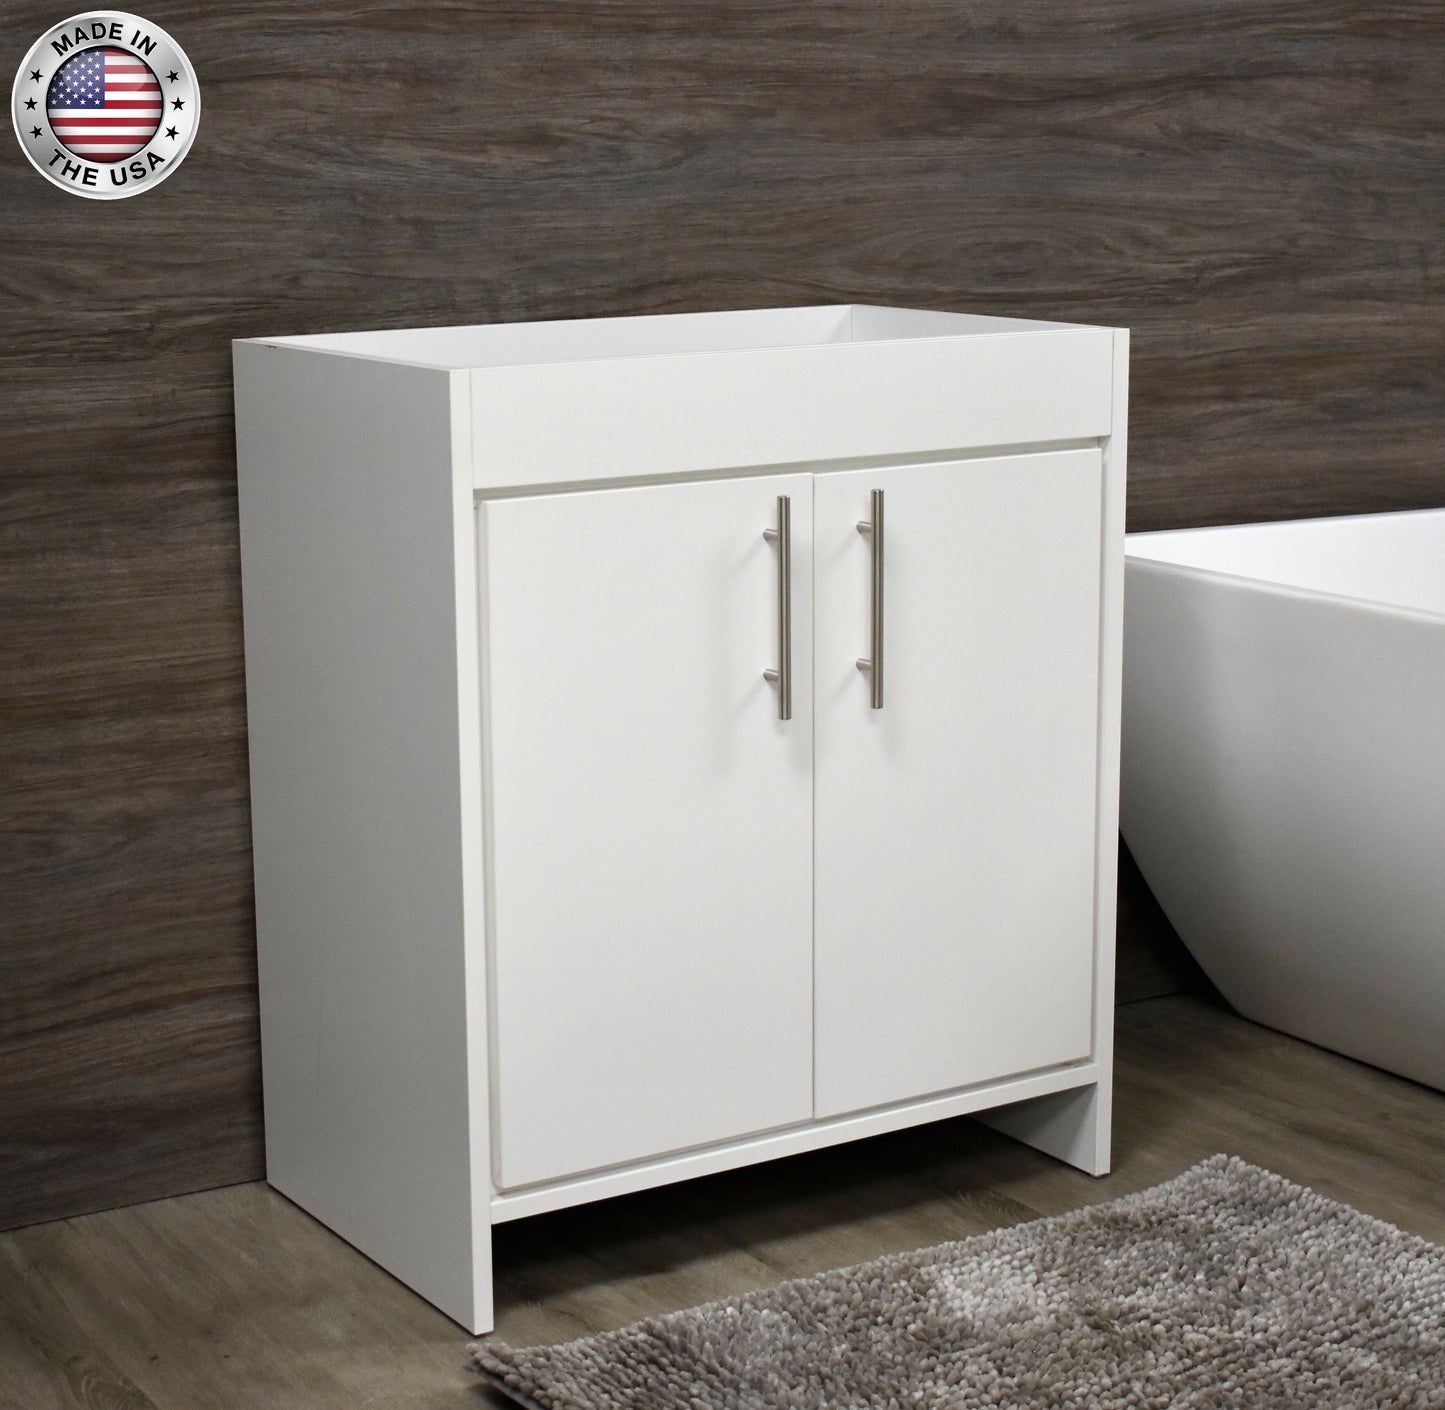 Volpa Villa 36" Modern Bathroom Vanity with Brushed Nickel Round Handles Cabinet Only - Luxe Bathroom Vanities Luxury Bathroom Fixtures Bathroom Furniture